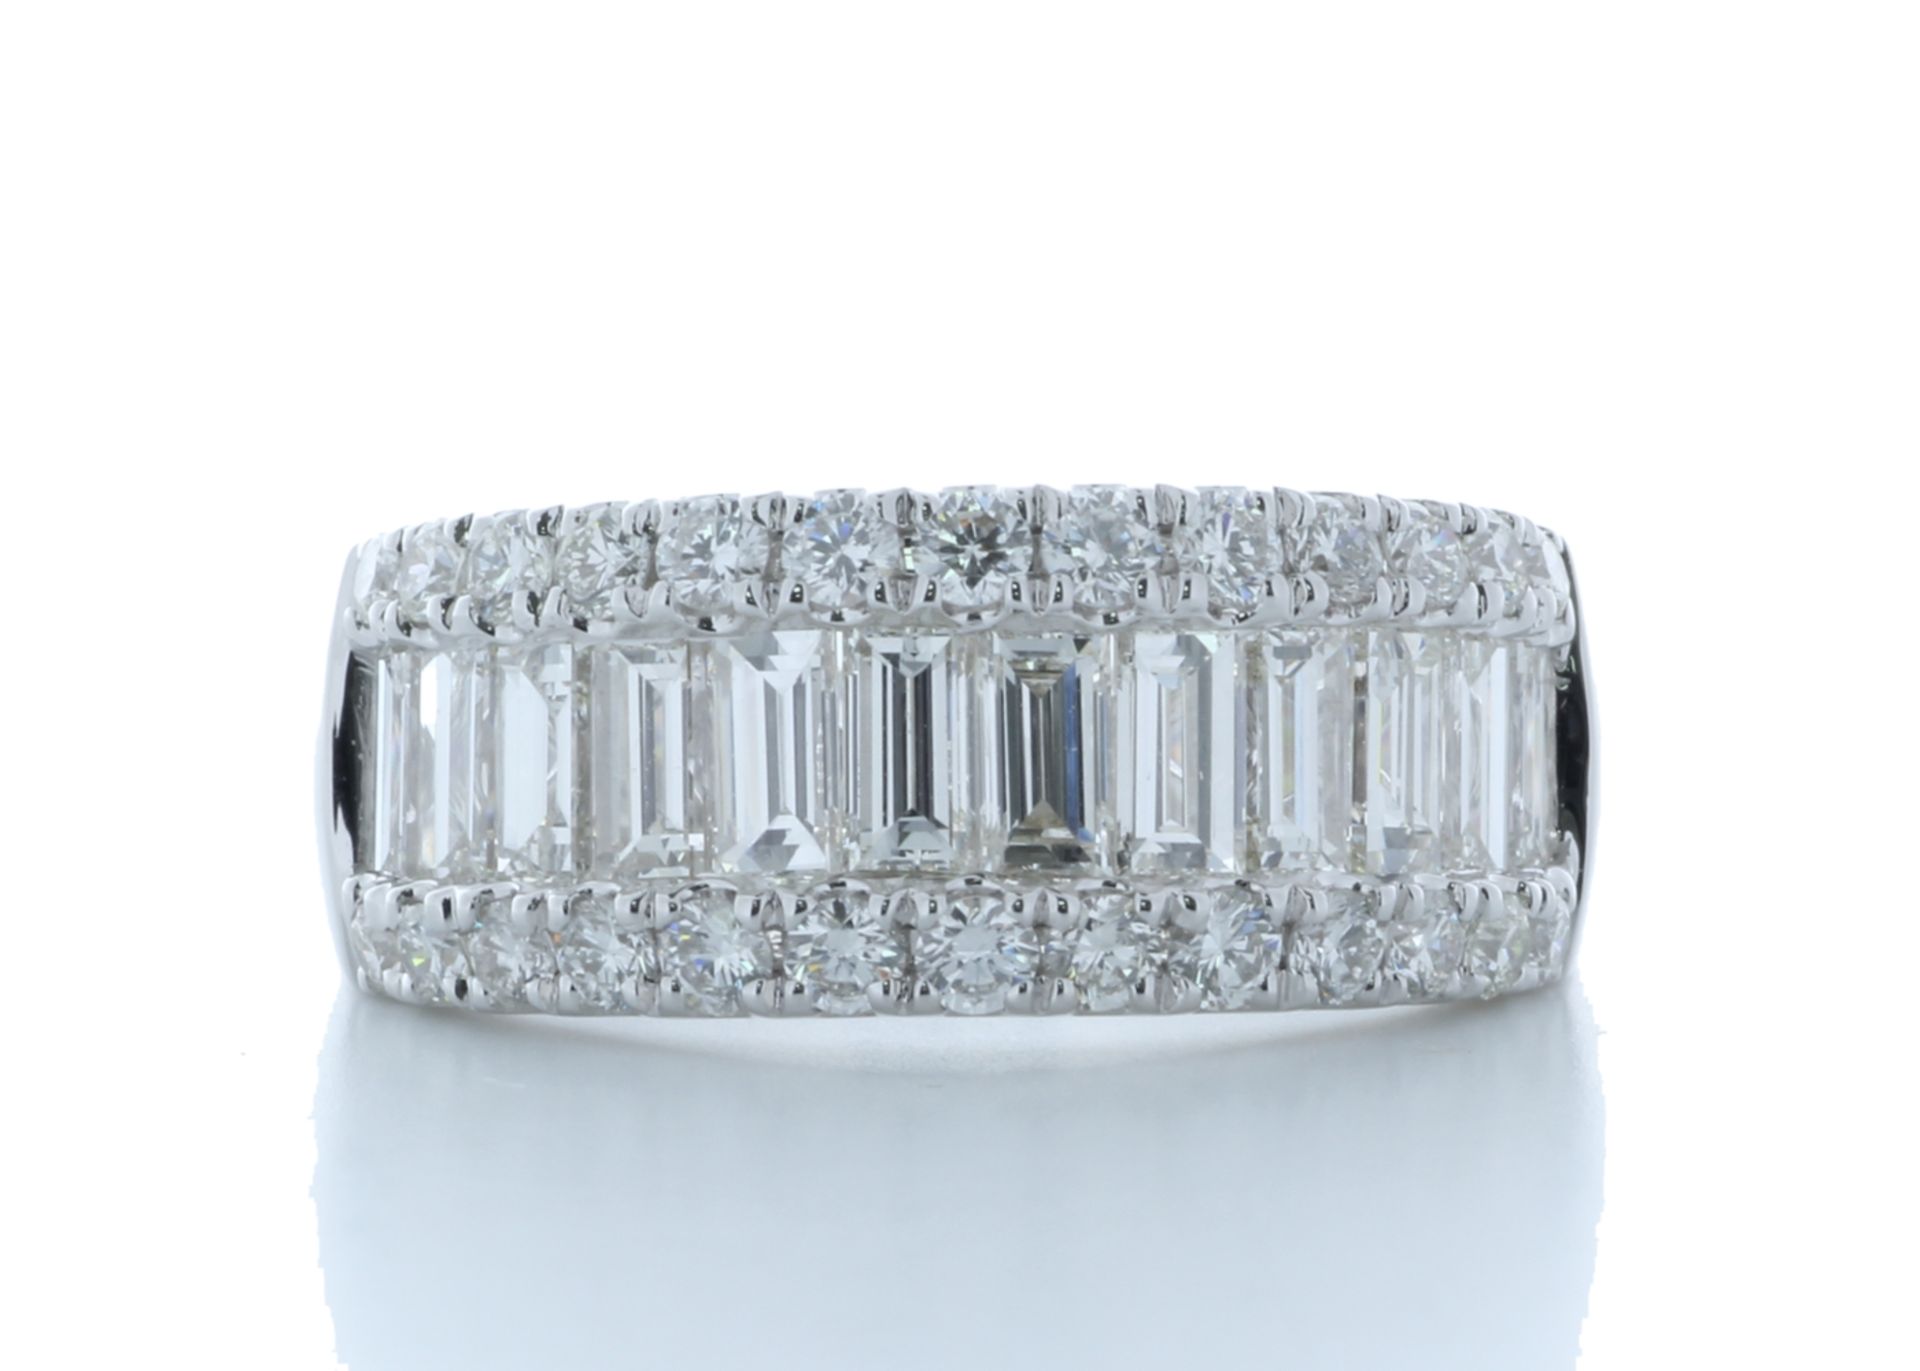 18ct White Gold Channel Set Semi Eternity Diamond Ring 2.34 Carats - Valued by AGI £17,600.00 - 18ct